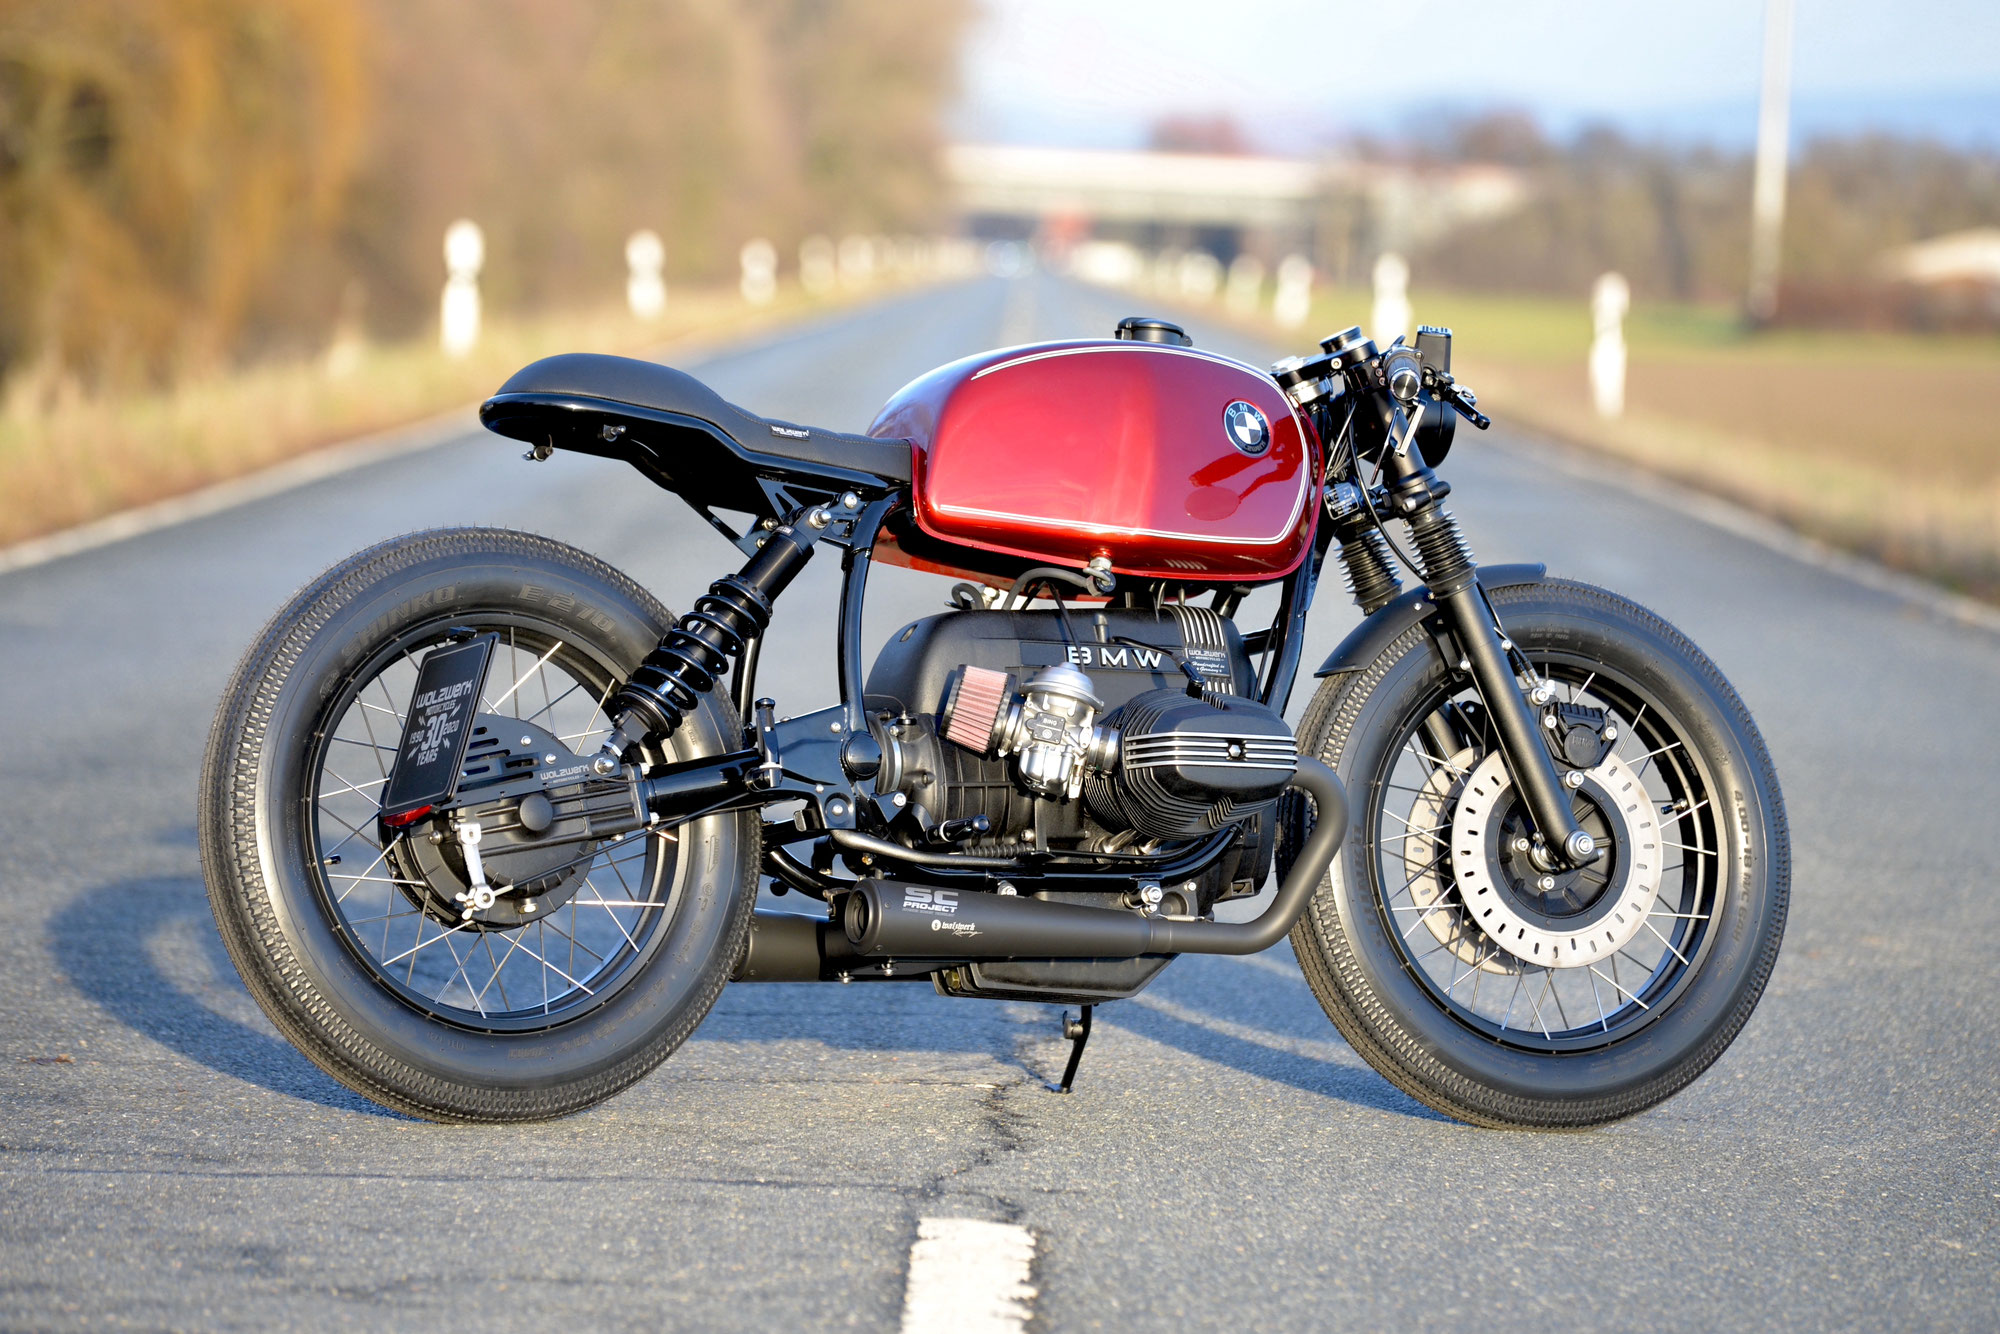 New Bike: SCHIZZO® Cafe Racer in "Ruby-Red"!